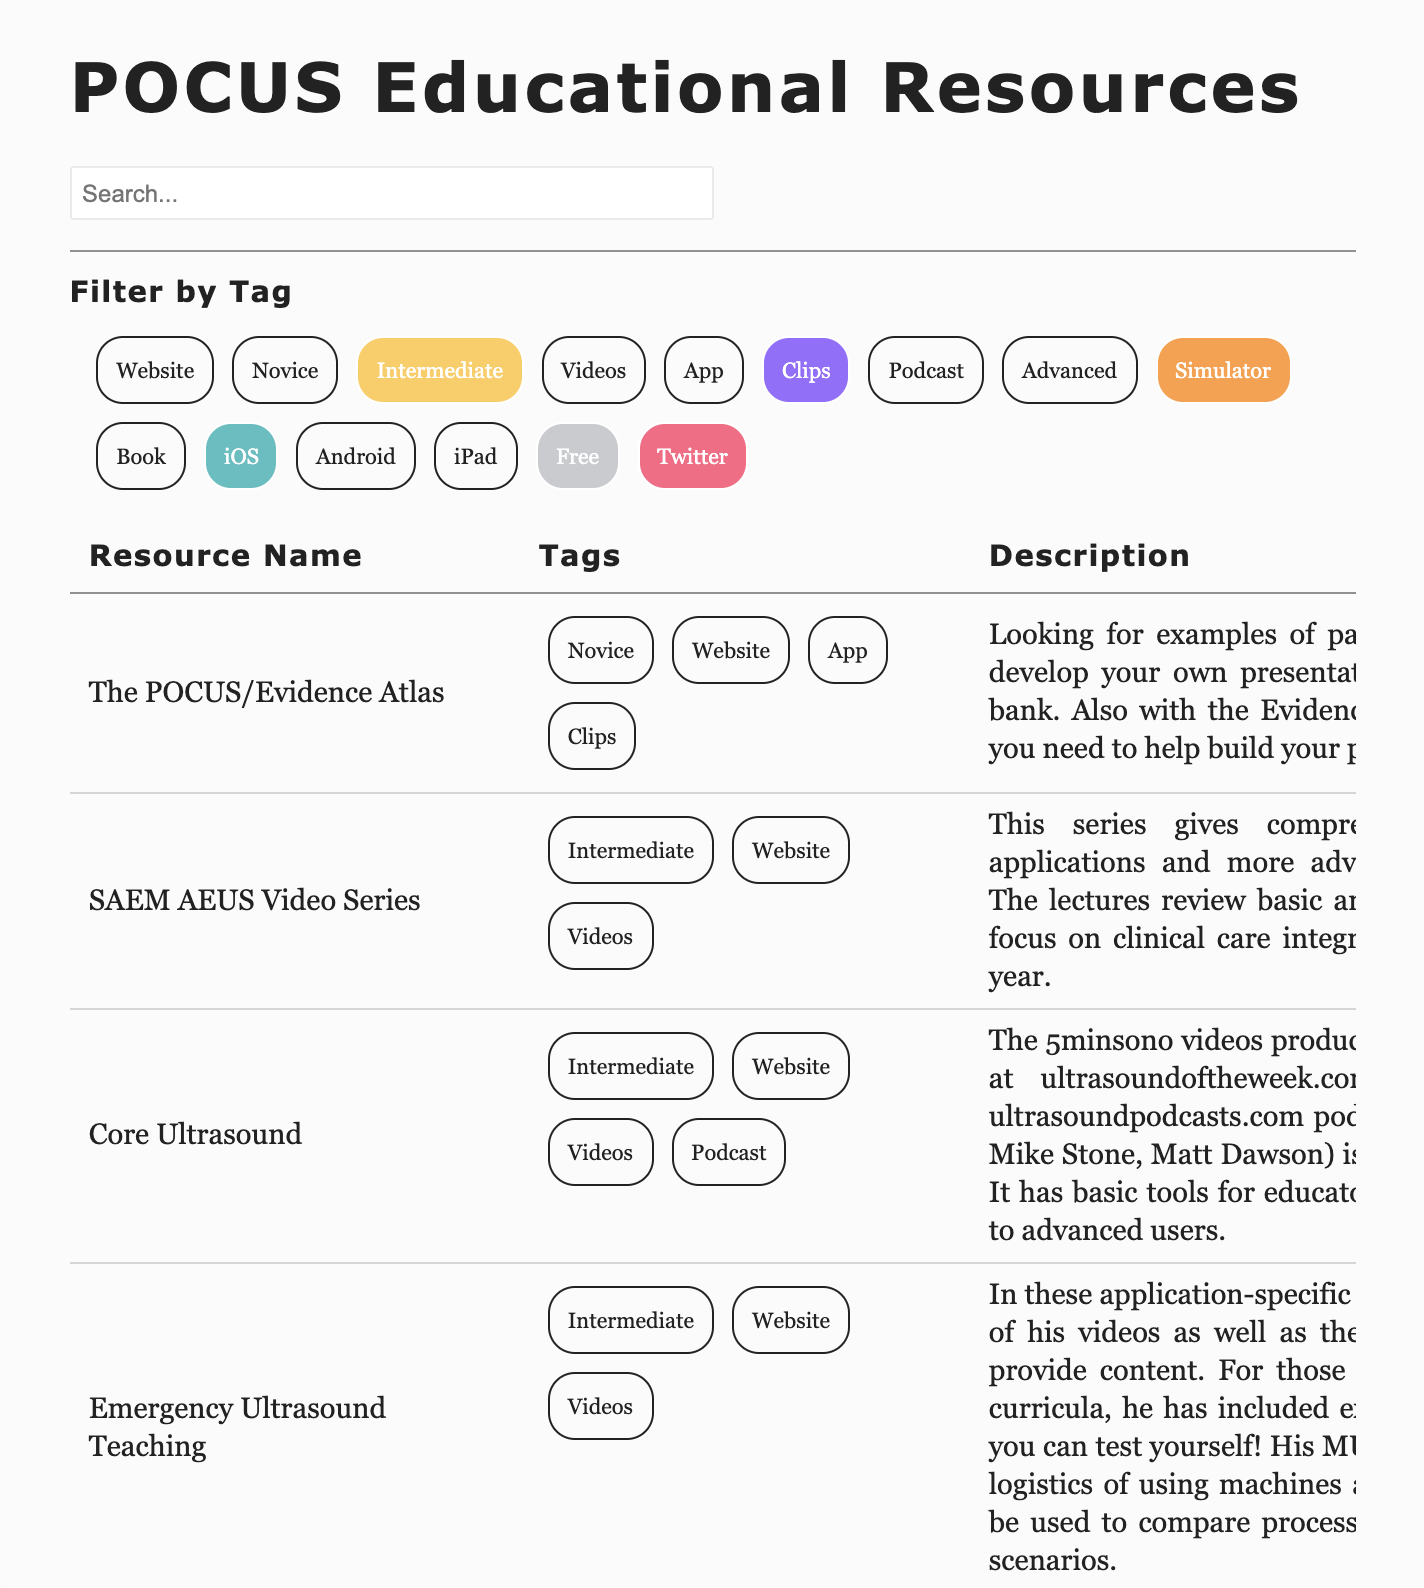 POCUS Resources List | A thorough (though not comprehensive) list of POCUS resources, with HUGE than...